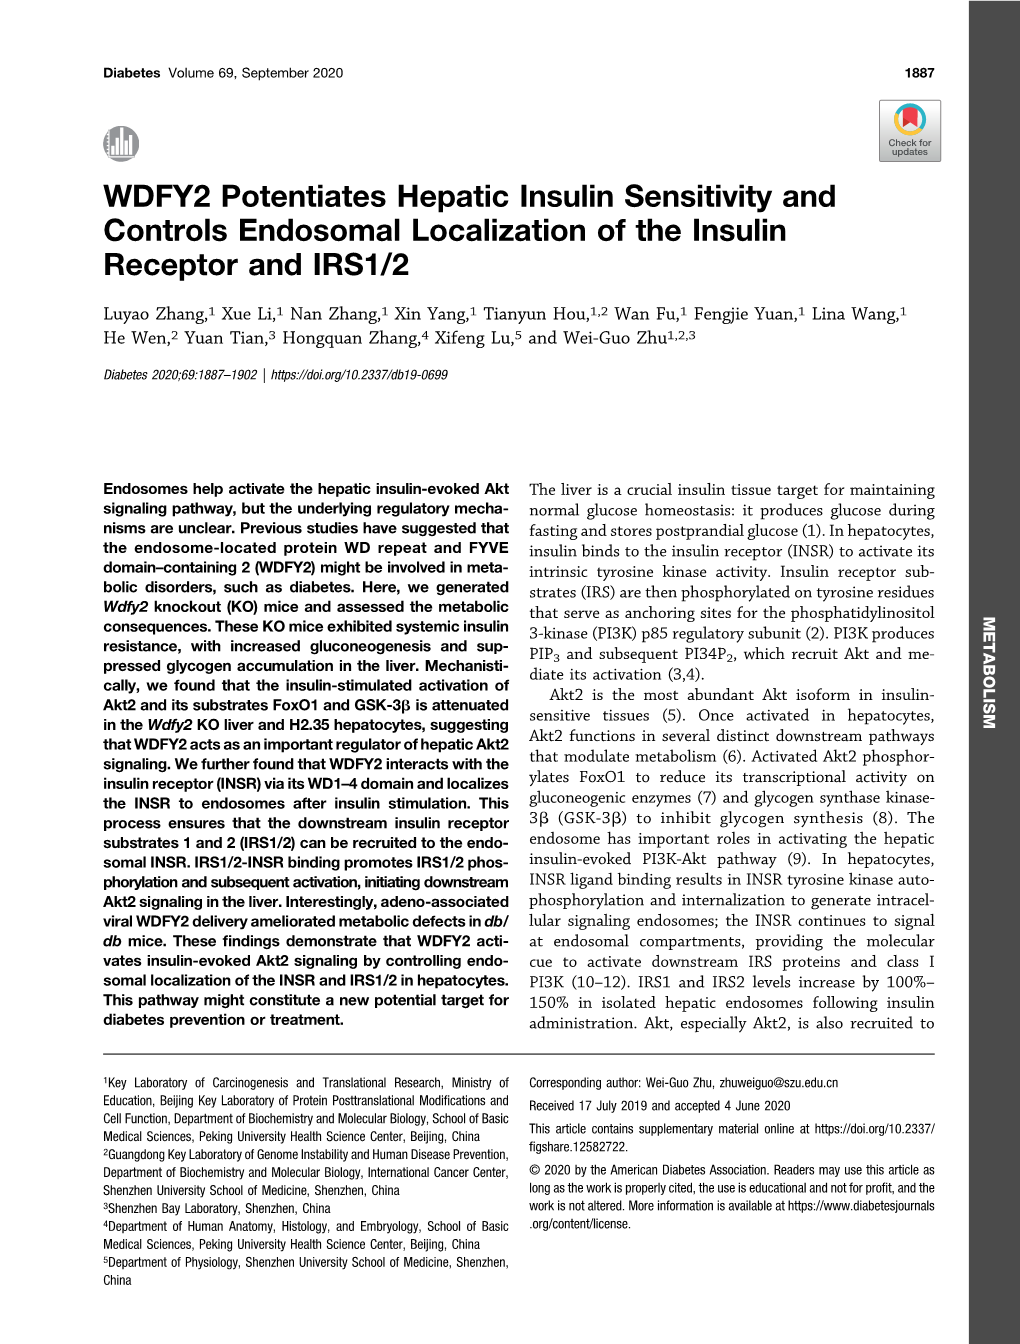 WDFY2 Potentiates Hepatic Insulin Sensitivity and Controls Endosomal Localization of the Insulin Receptor and IRS1/2